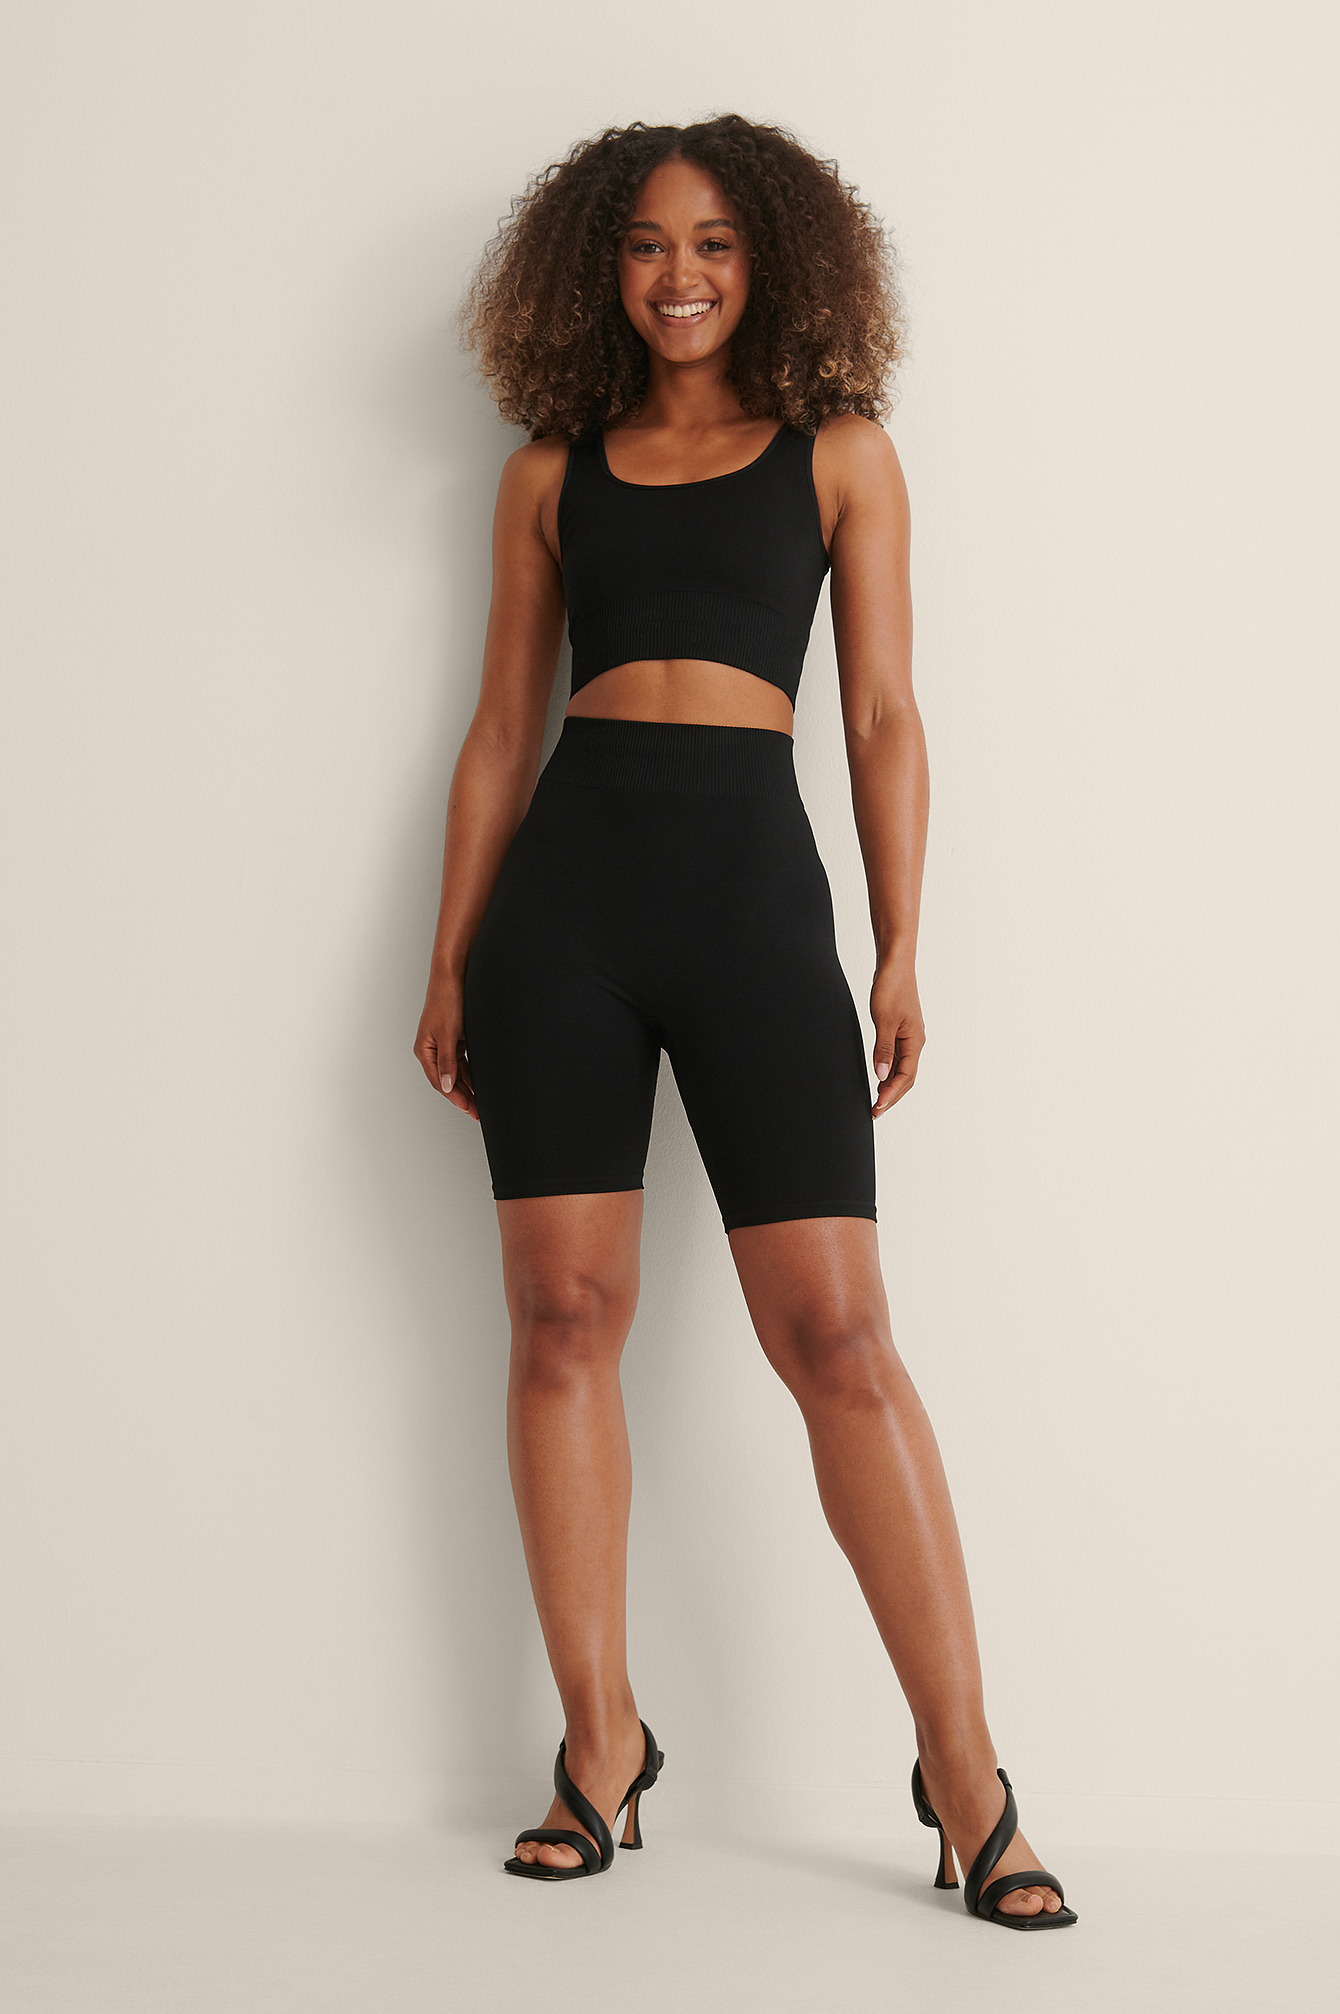 Seamless Bicycle Sports Shorts Outfit.